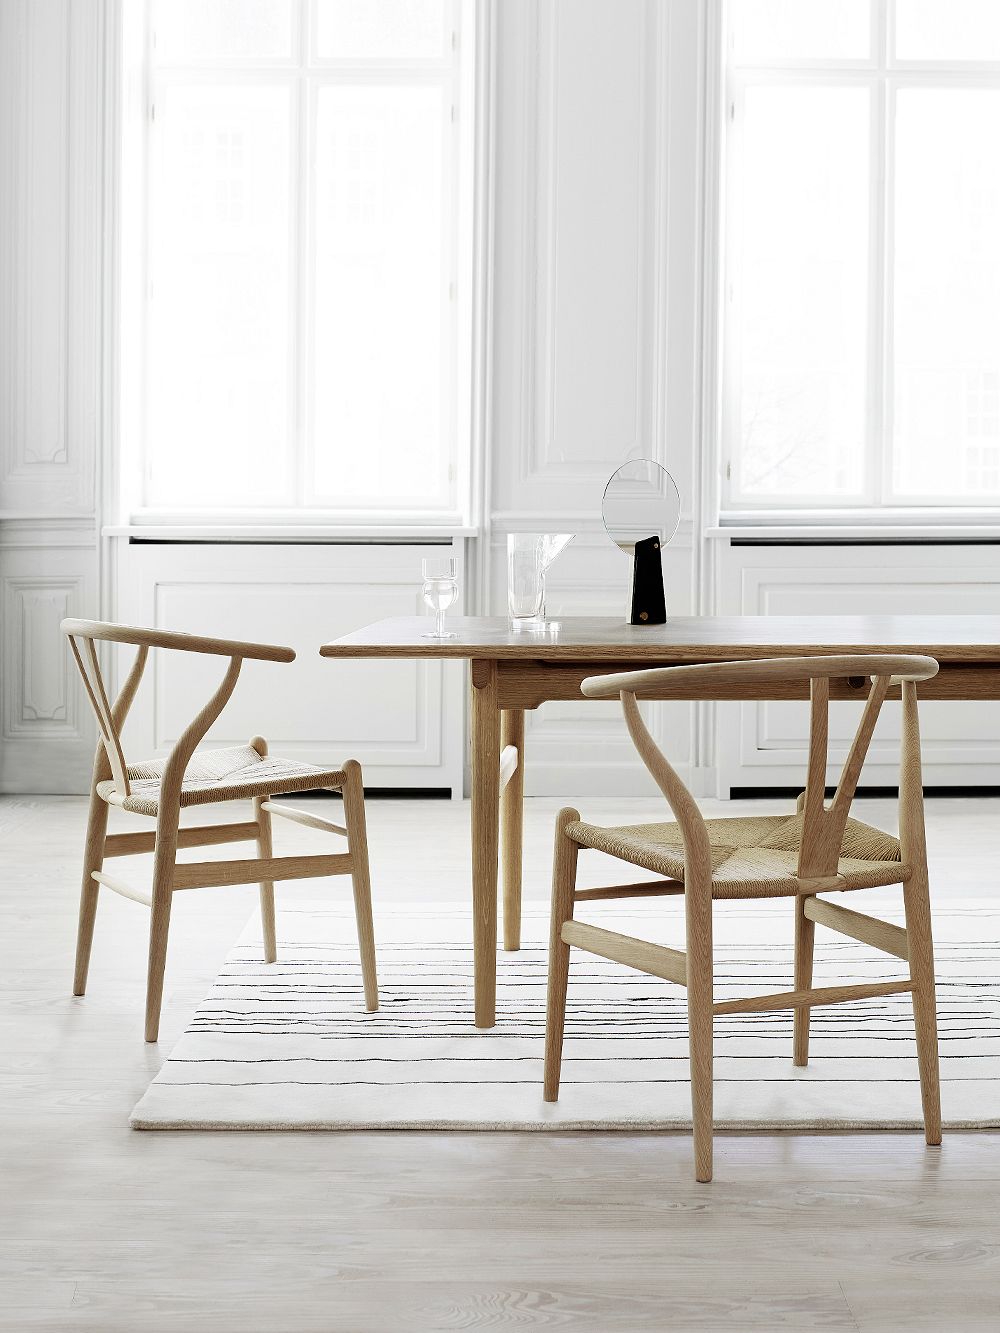 Carl Hansen & Søn's Wishbone chairs in soaped beech and natural paper cord, placed around a dining table